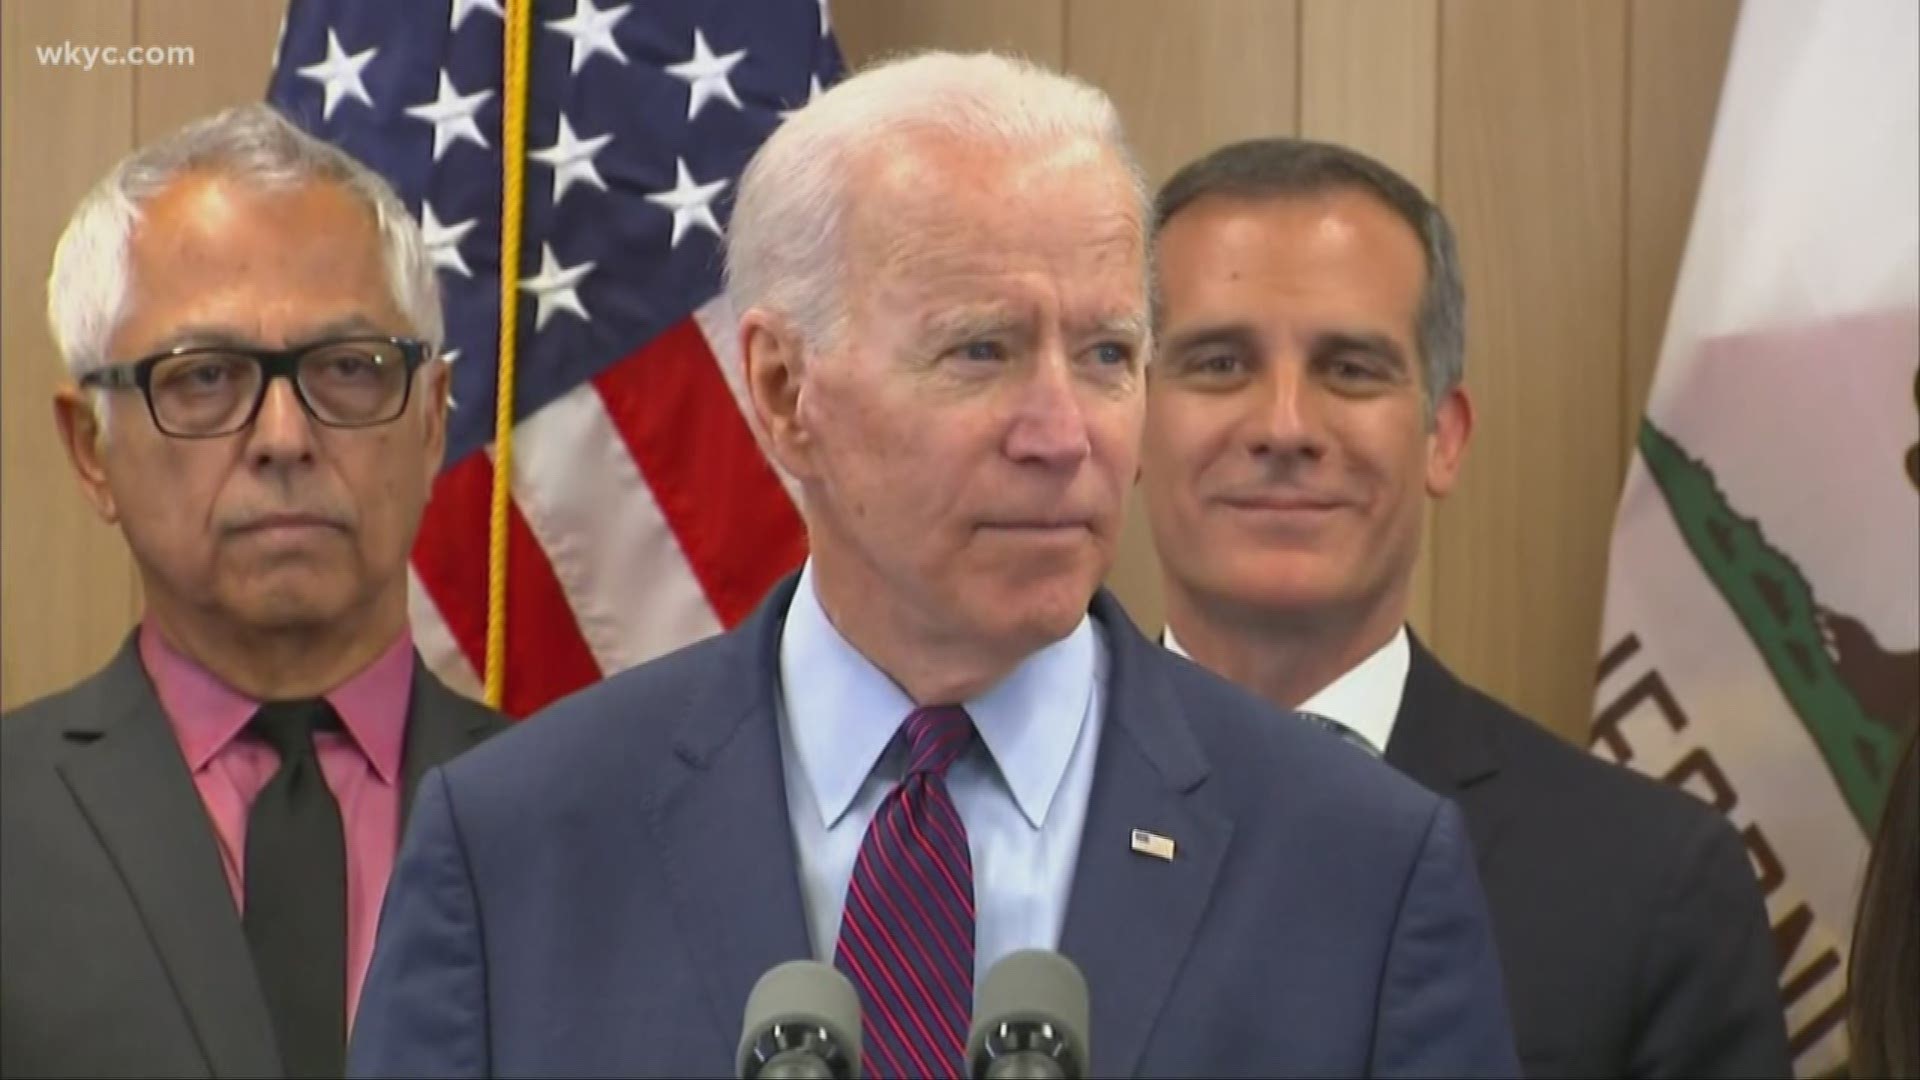 Presidential candidate Joe Biden is expected to visit Ohio next week for his campaign. Details on his visit, including time and location, have yet to be released.